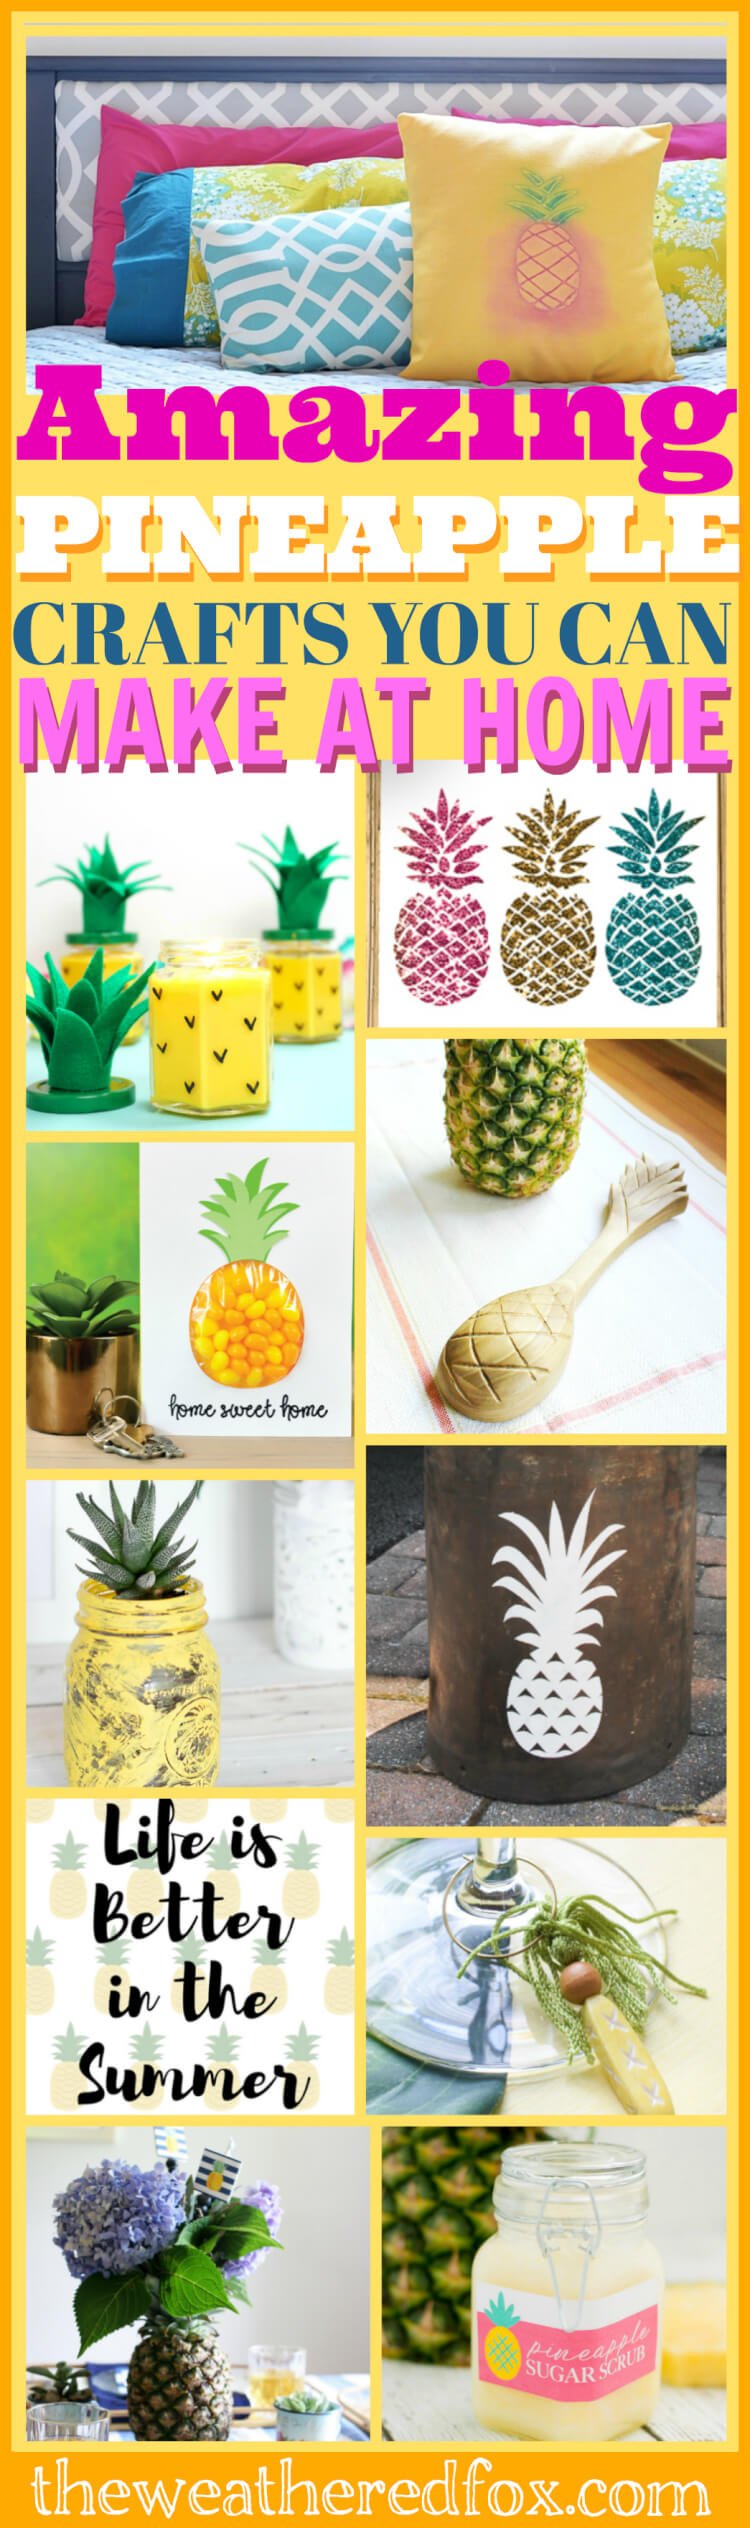 pineapple crafts collage photo